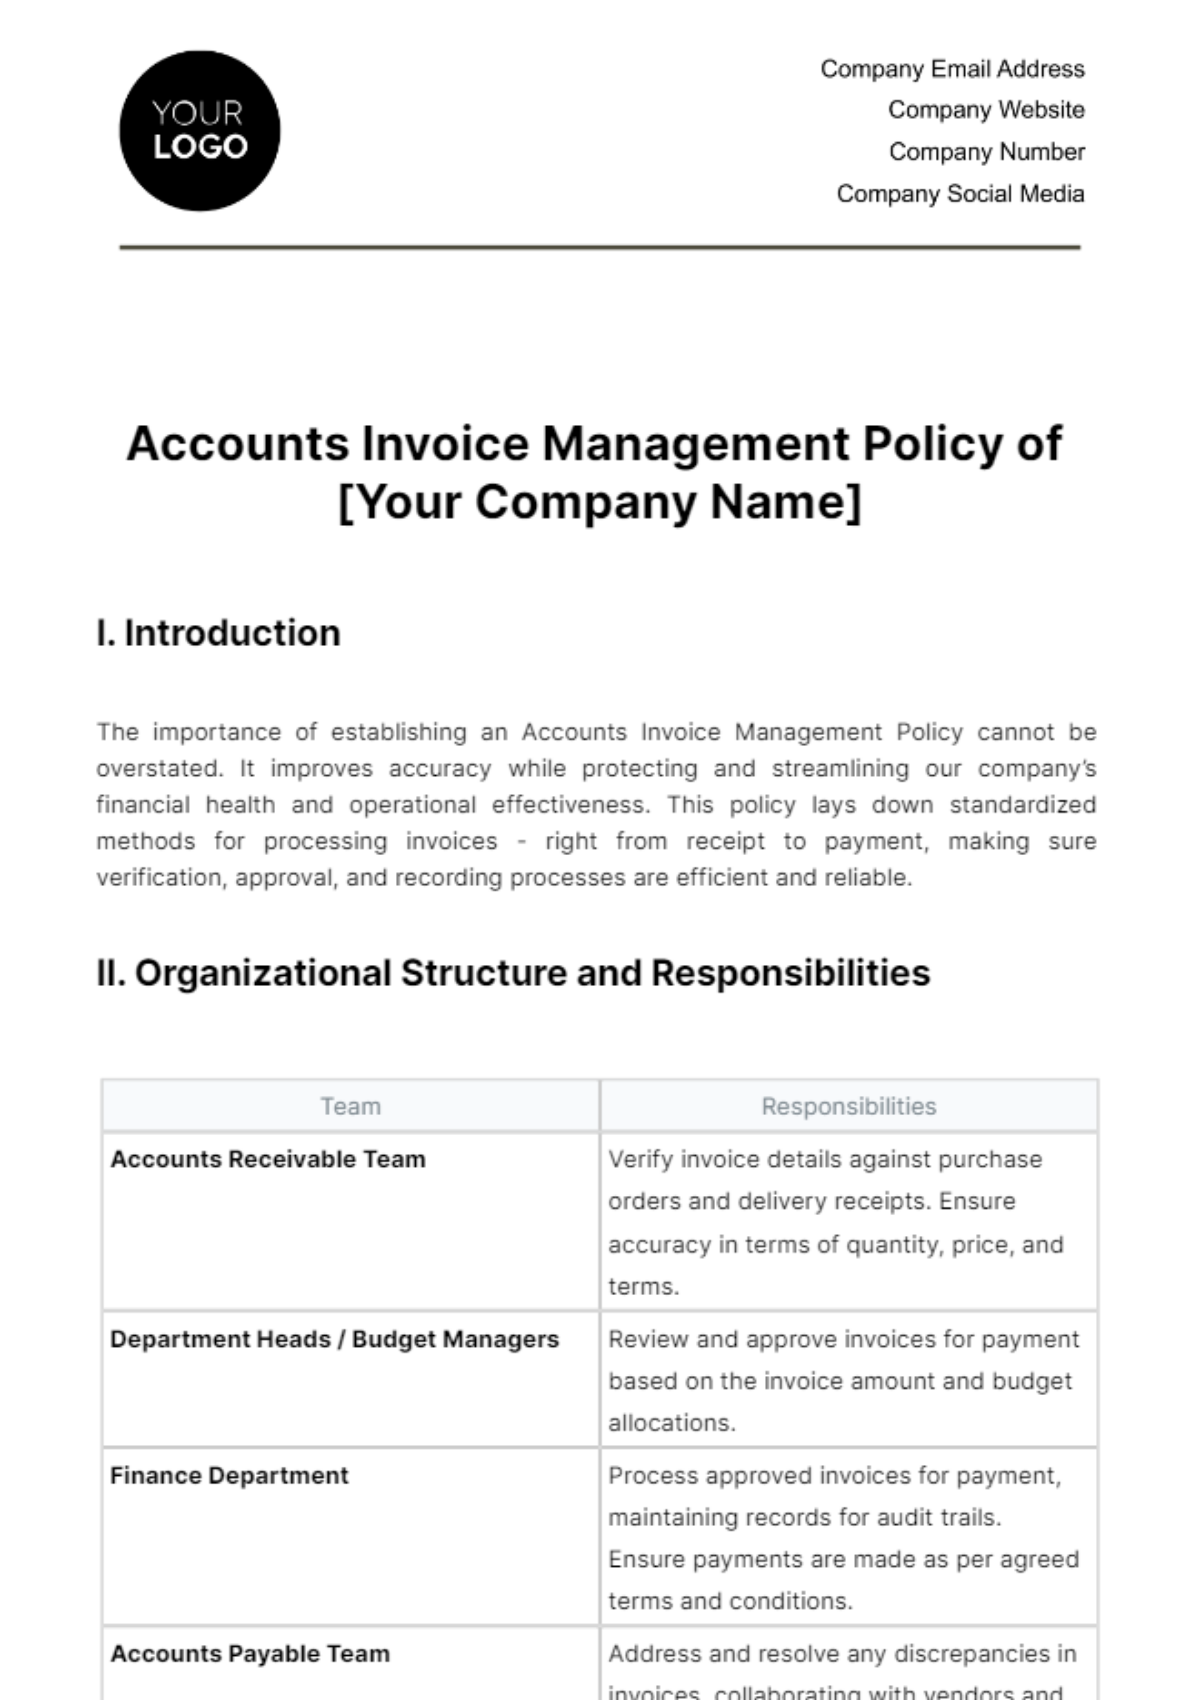 Free Accounts Invoice Management Policy Template